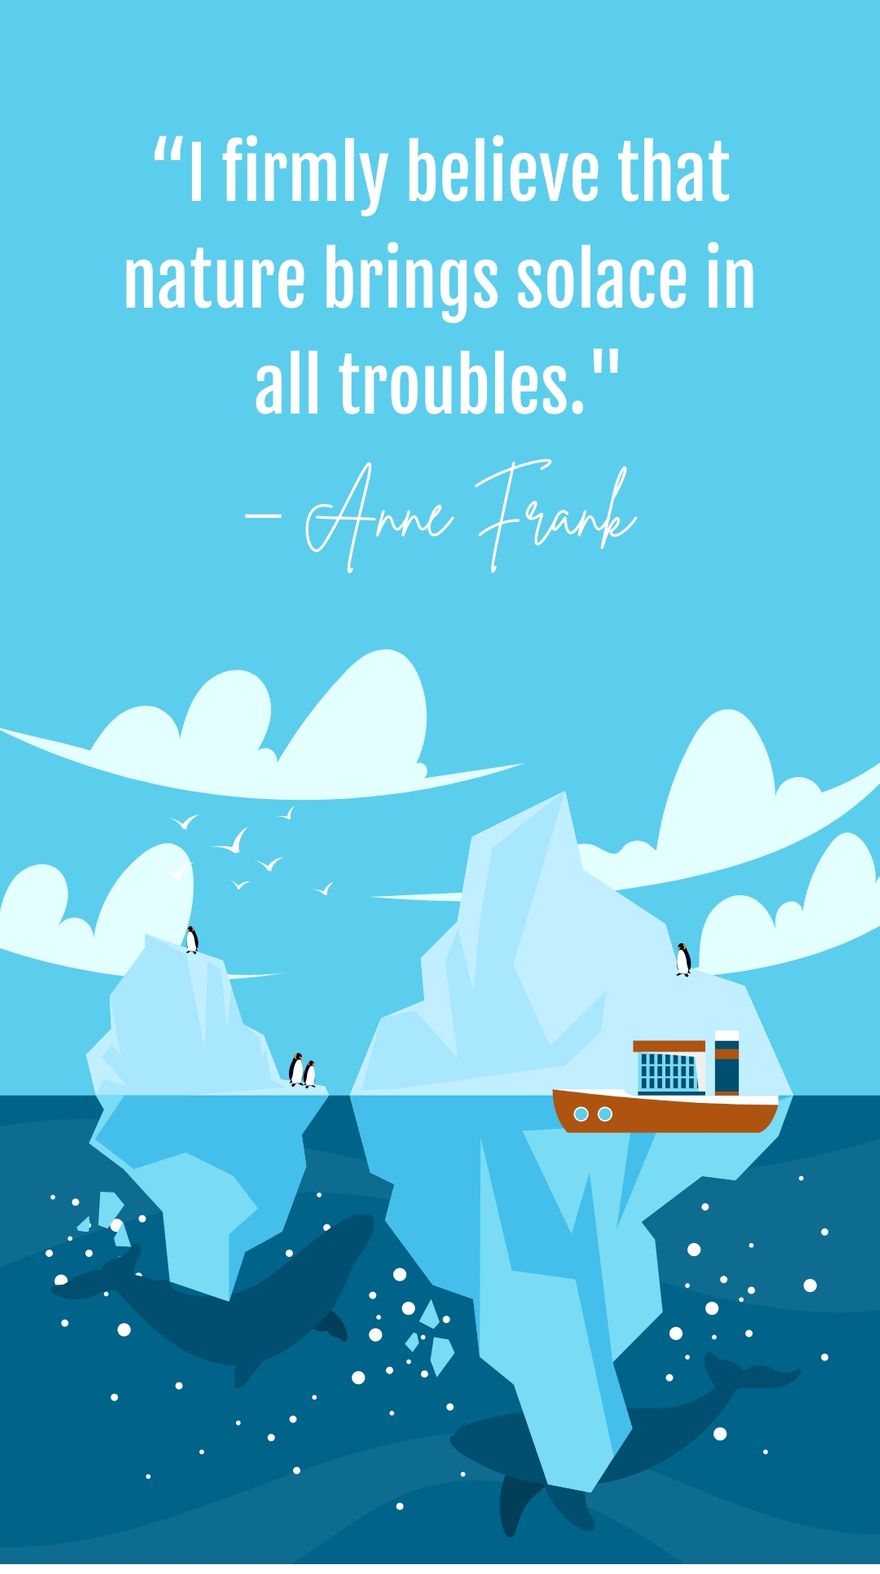 Free Anne Frank - I firmly believe that nature brings solace in all troubles.